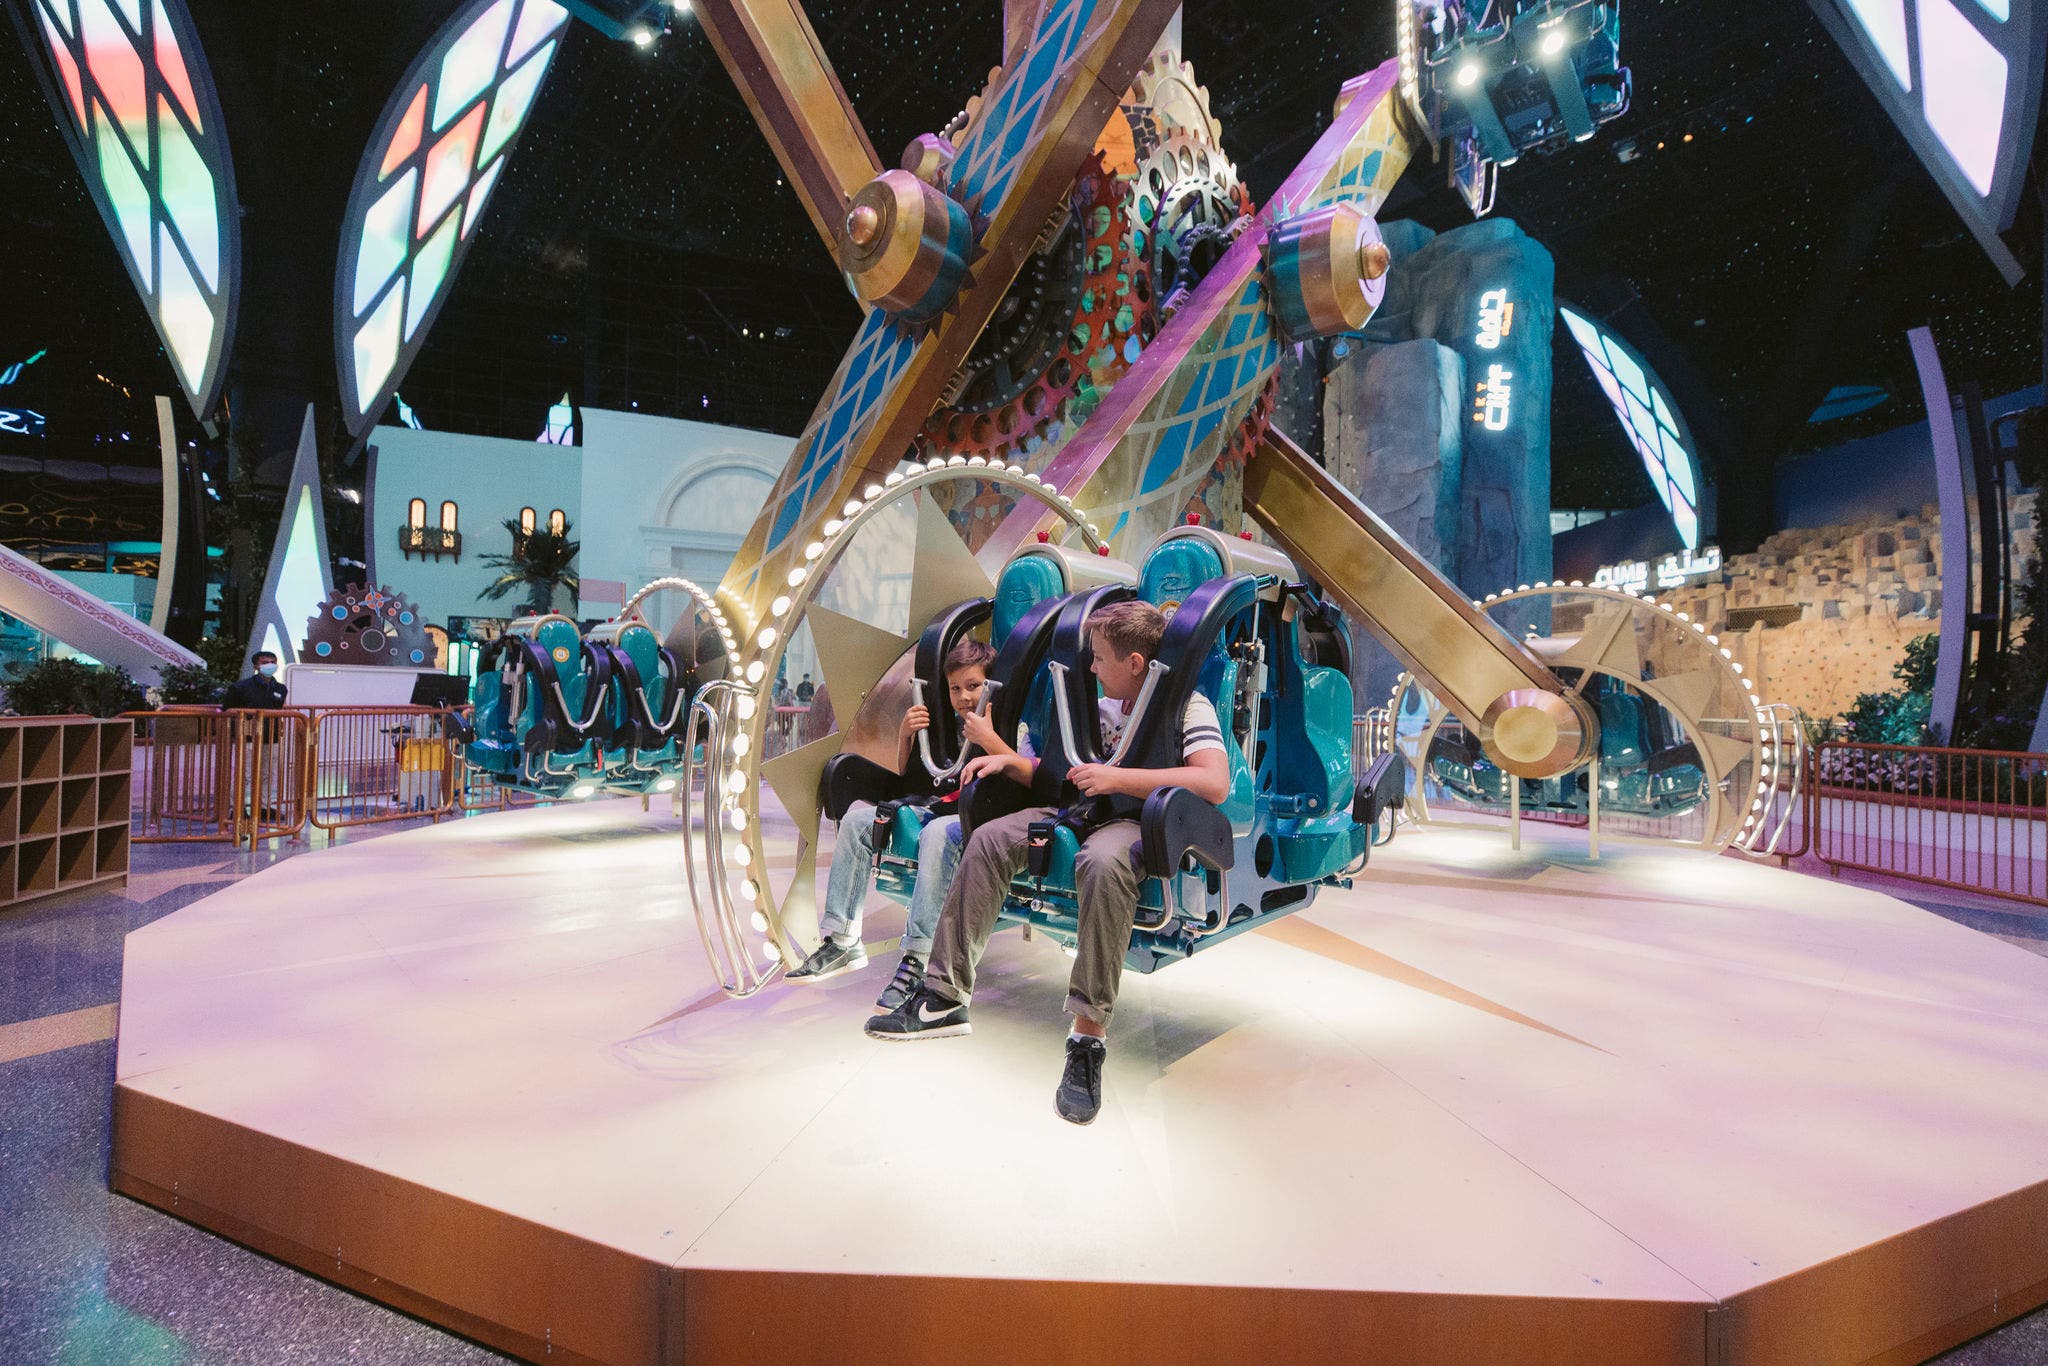 Cool off at these indoor attractions